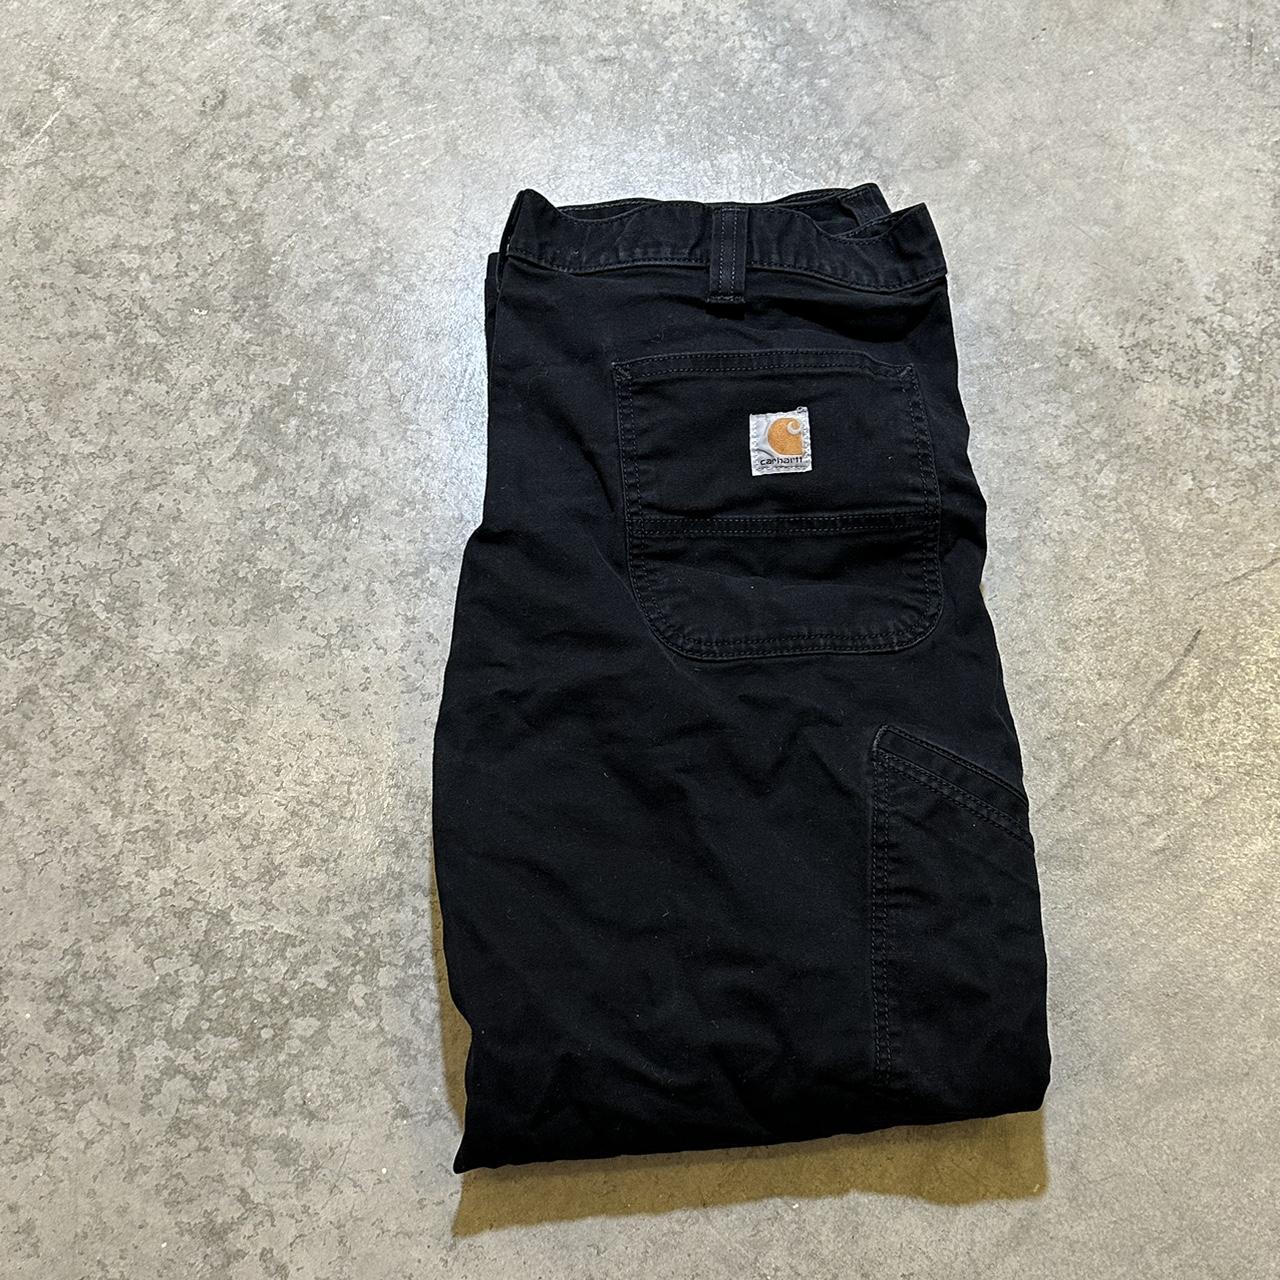 Solid Carhartt Pants Excellent condition and... - Depop